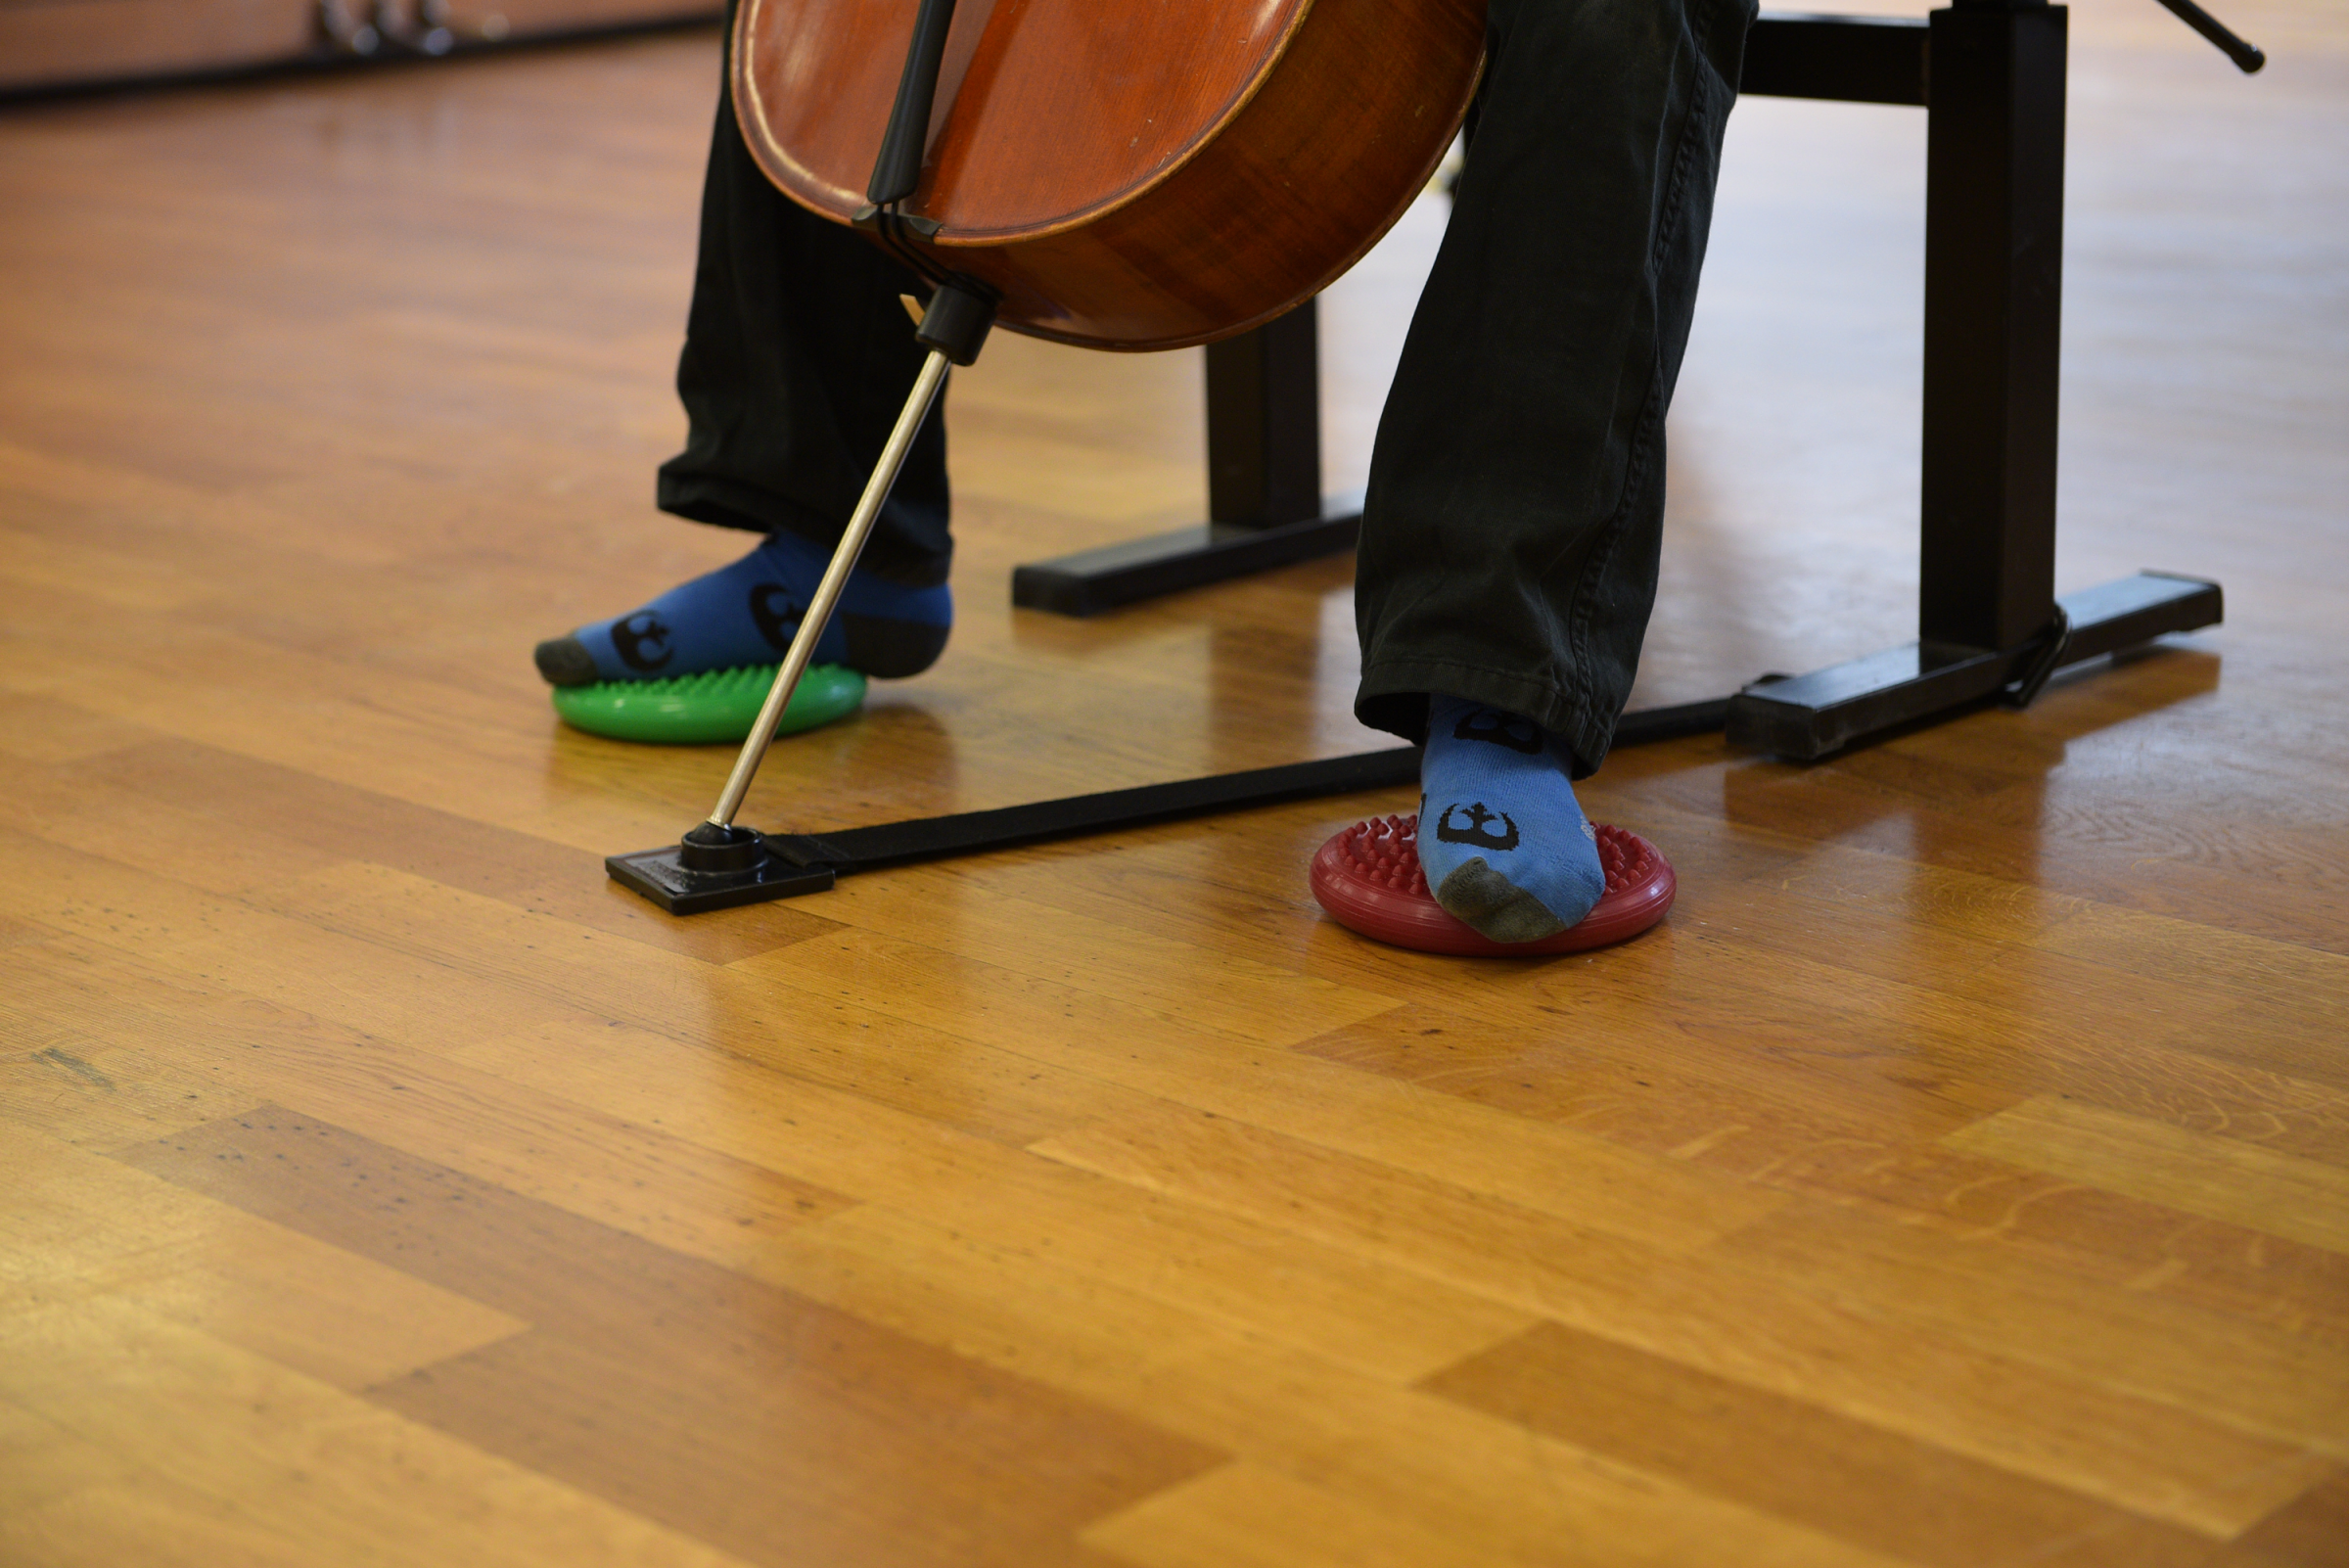 Mini ball cuhions from TOGU for cello players